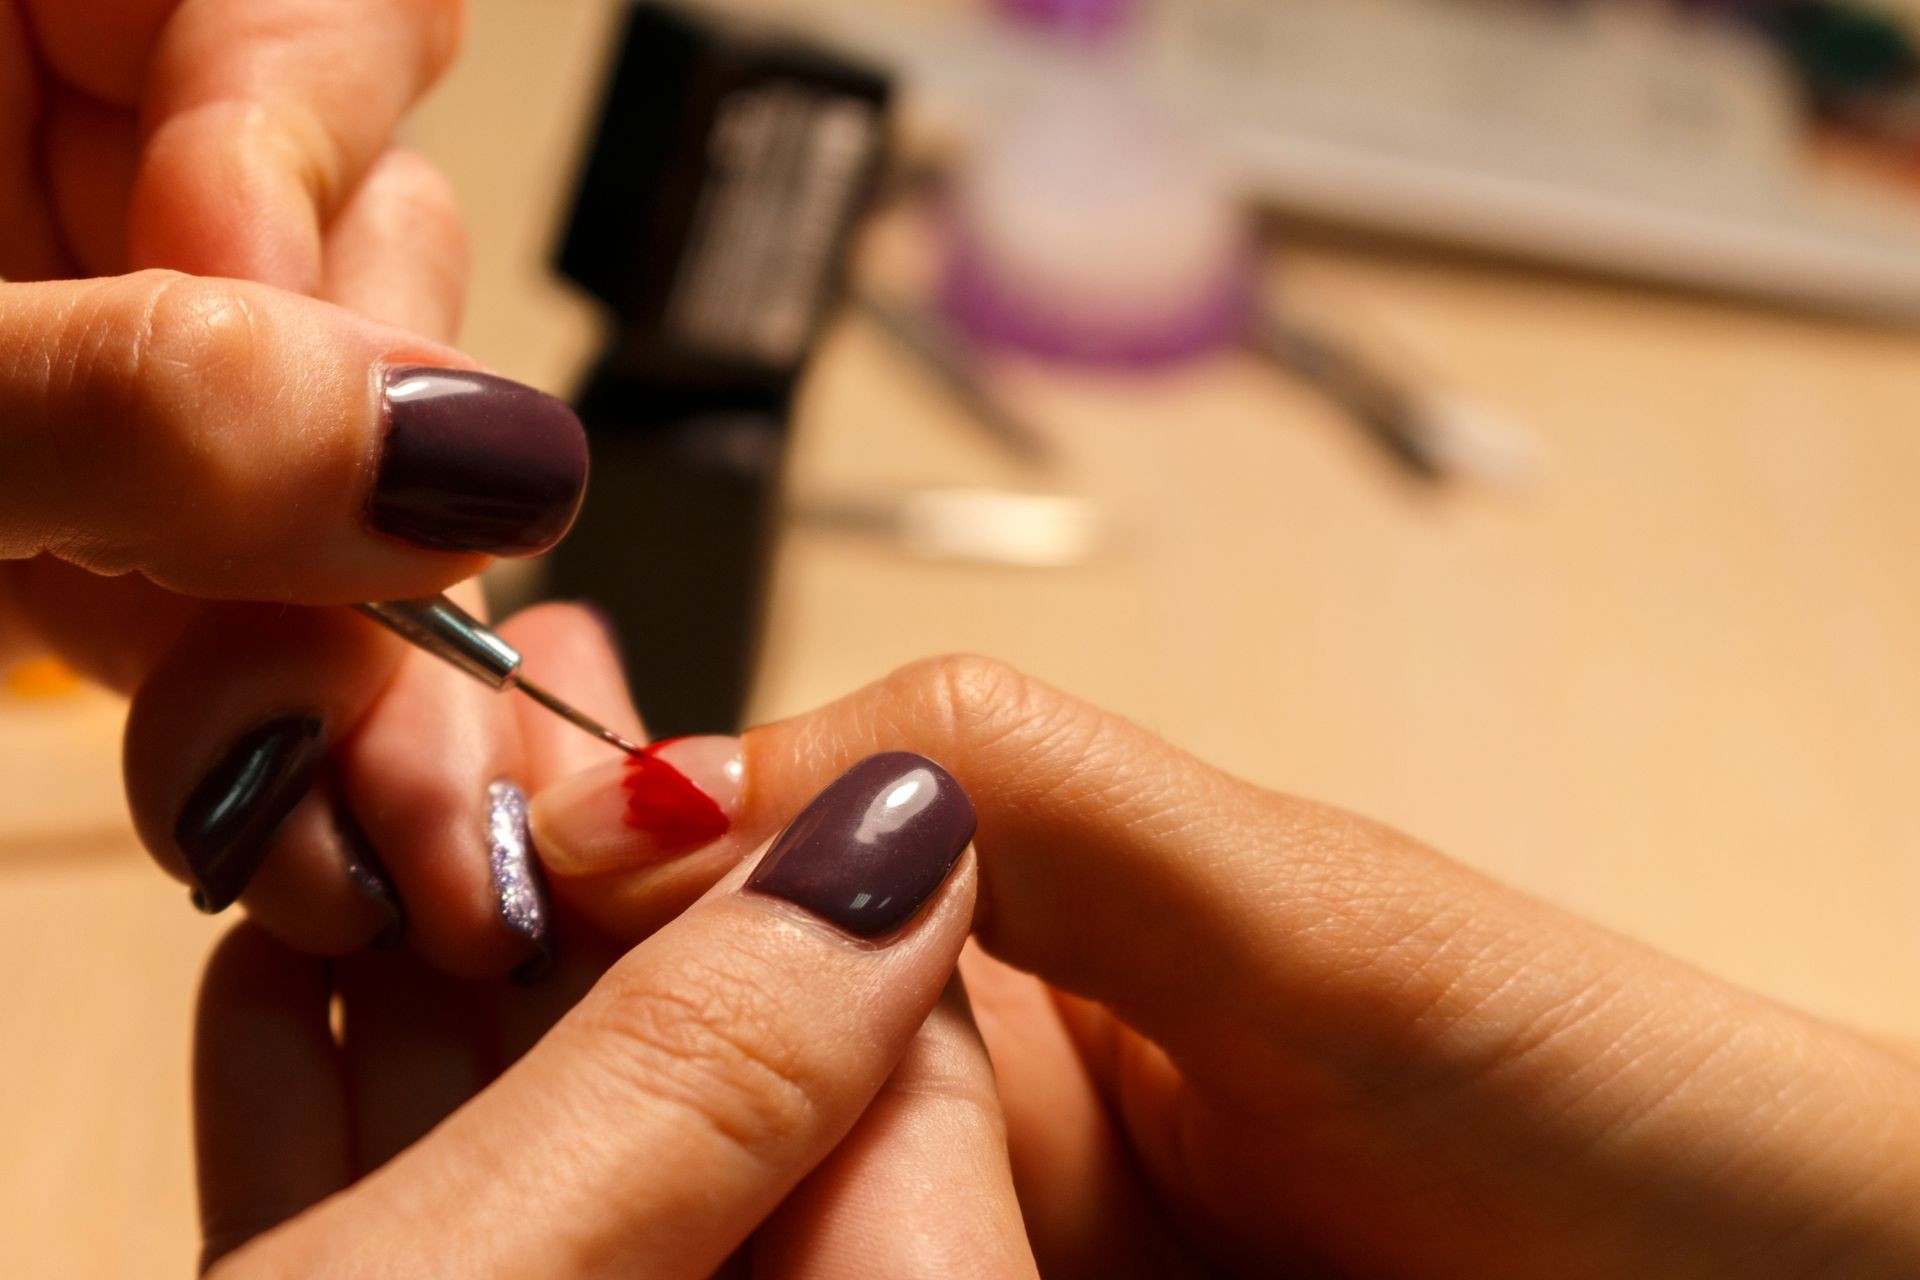 Closeup finger nail care by manicure specialist in beauty salon. Manicurist paints nails with nail polish. Master painted nails with nail polish. Details shot of hands applying purple nail.
